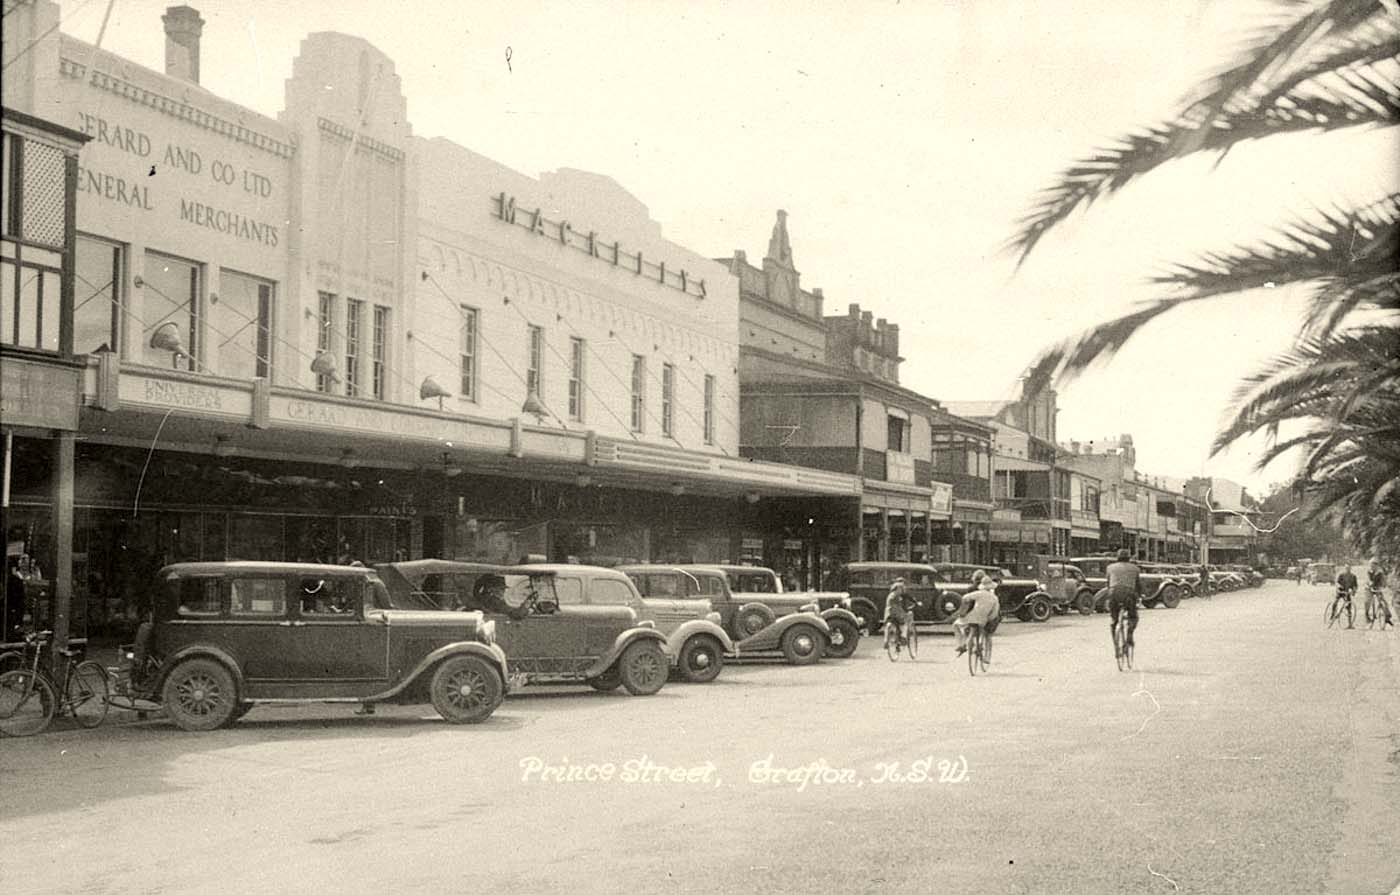 Grafton. View along Prince Street with parked cars, 1939